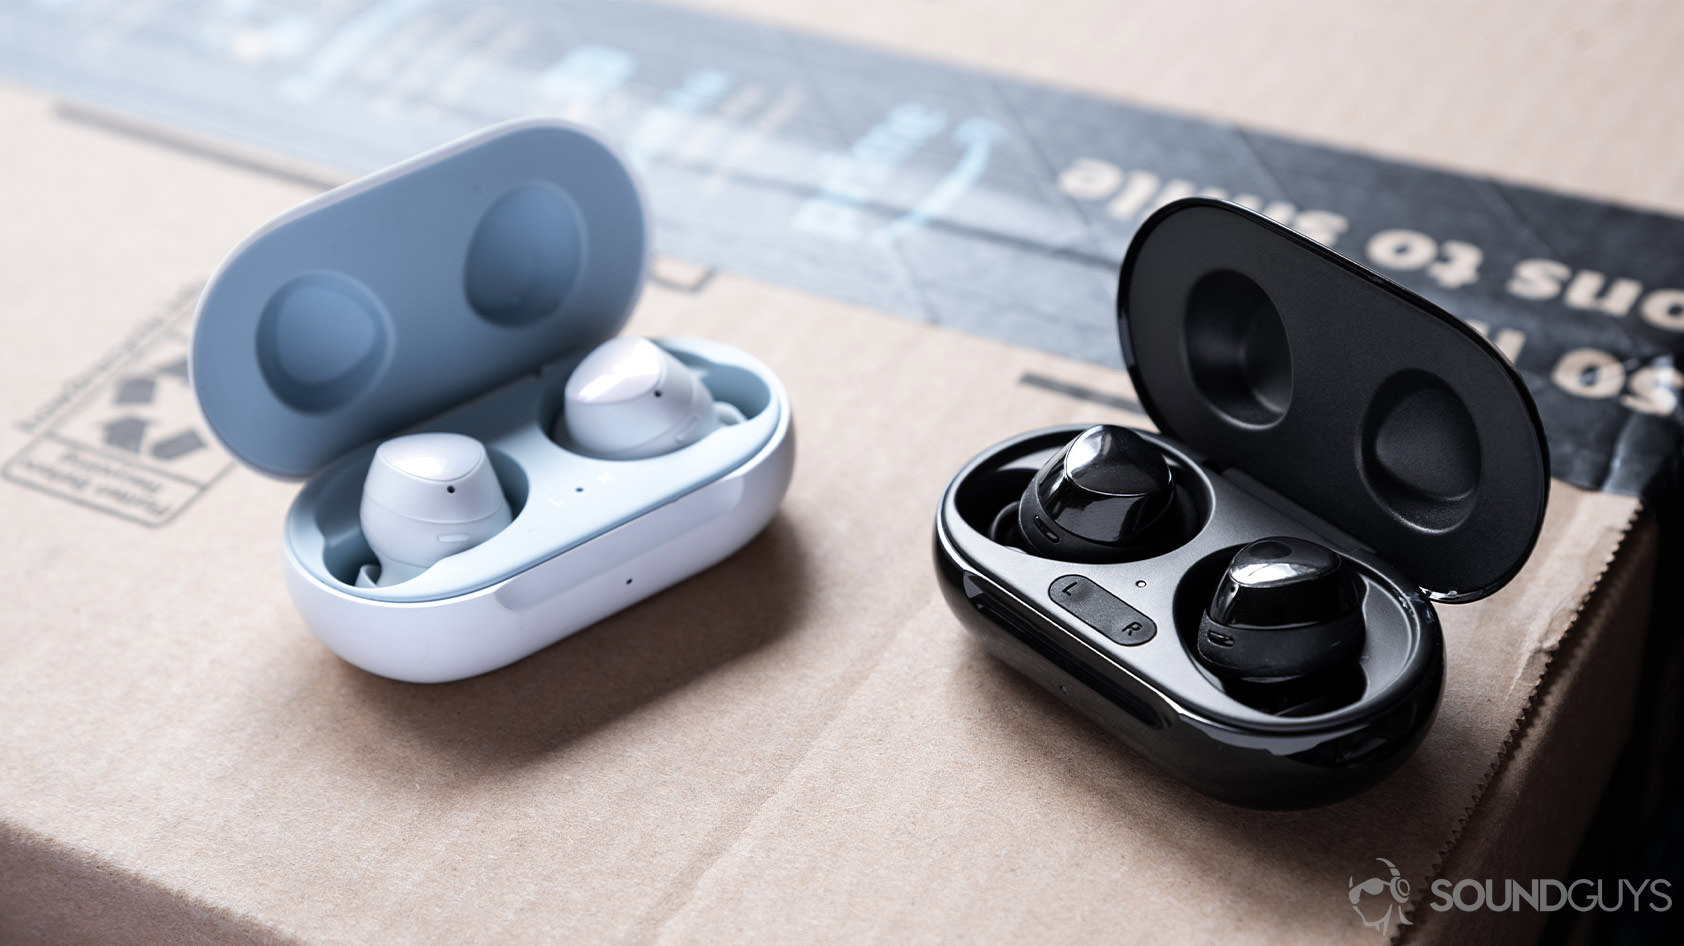 Samsung Galaxy Buds Plus review: Still great in 2021?